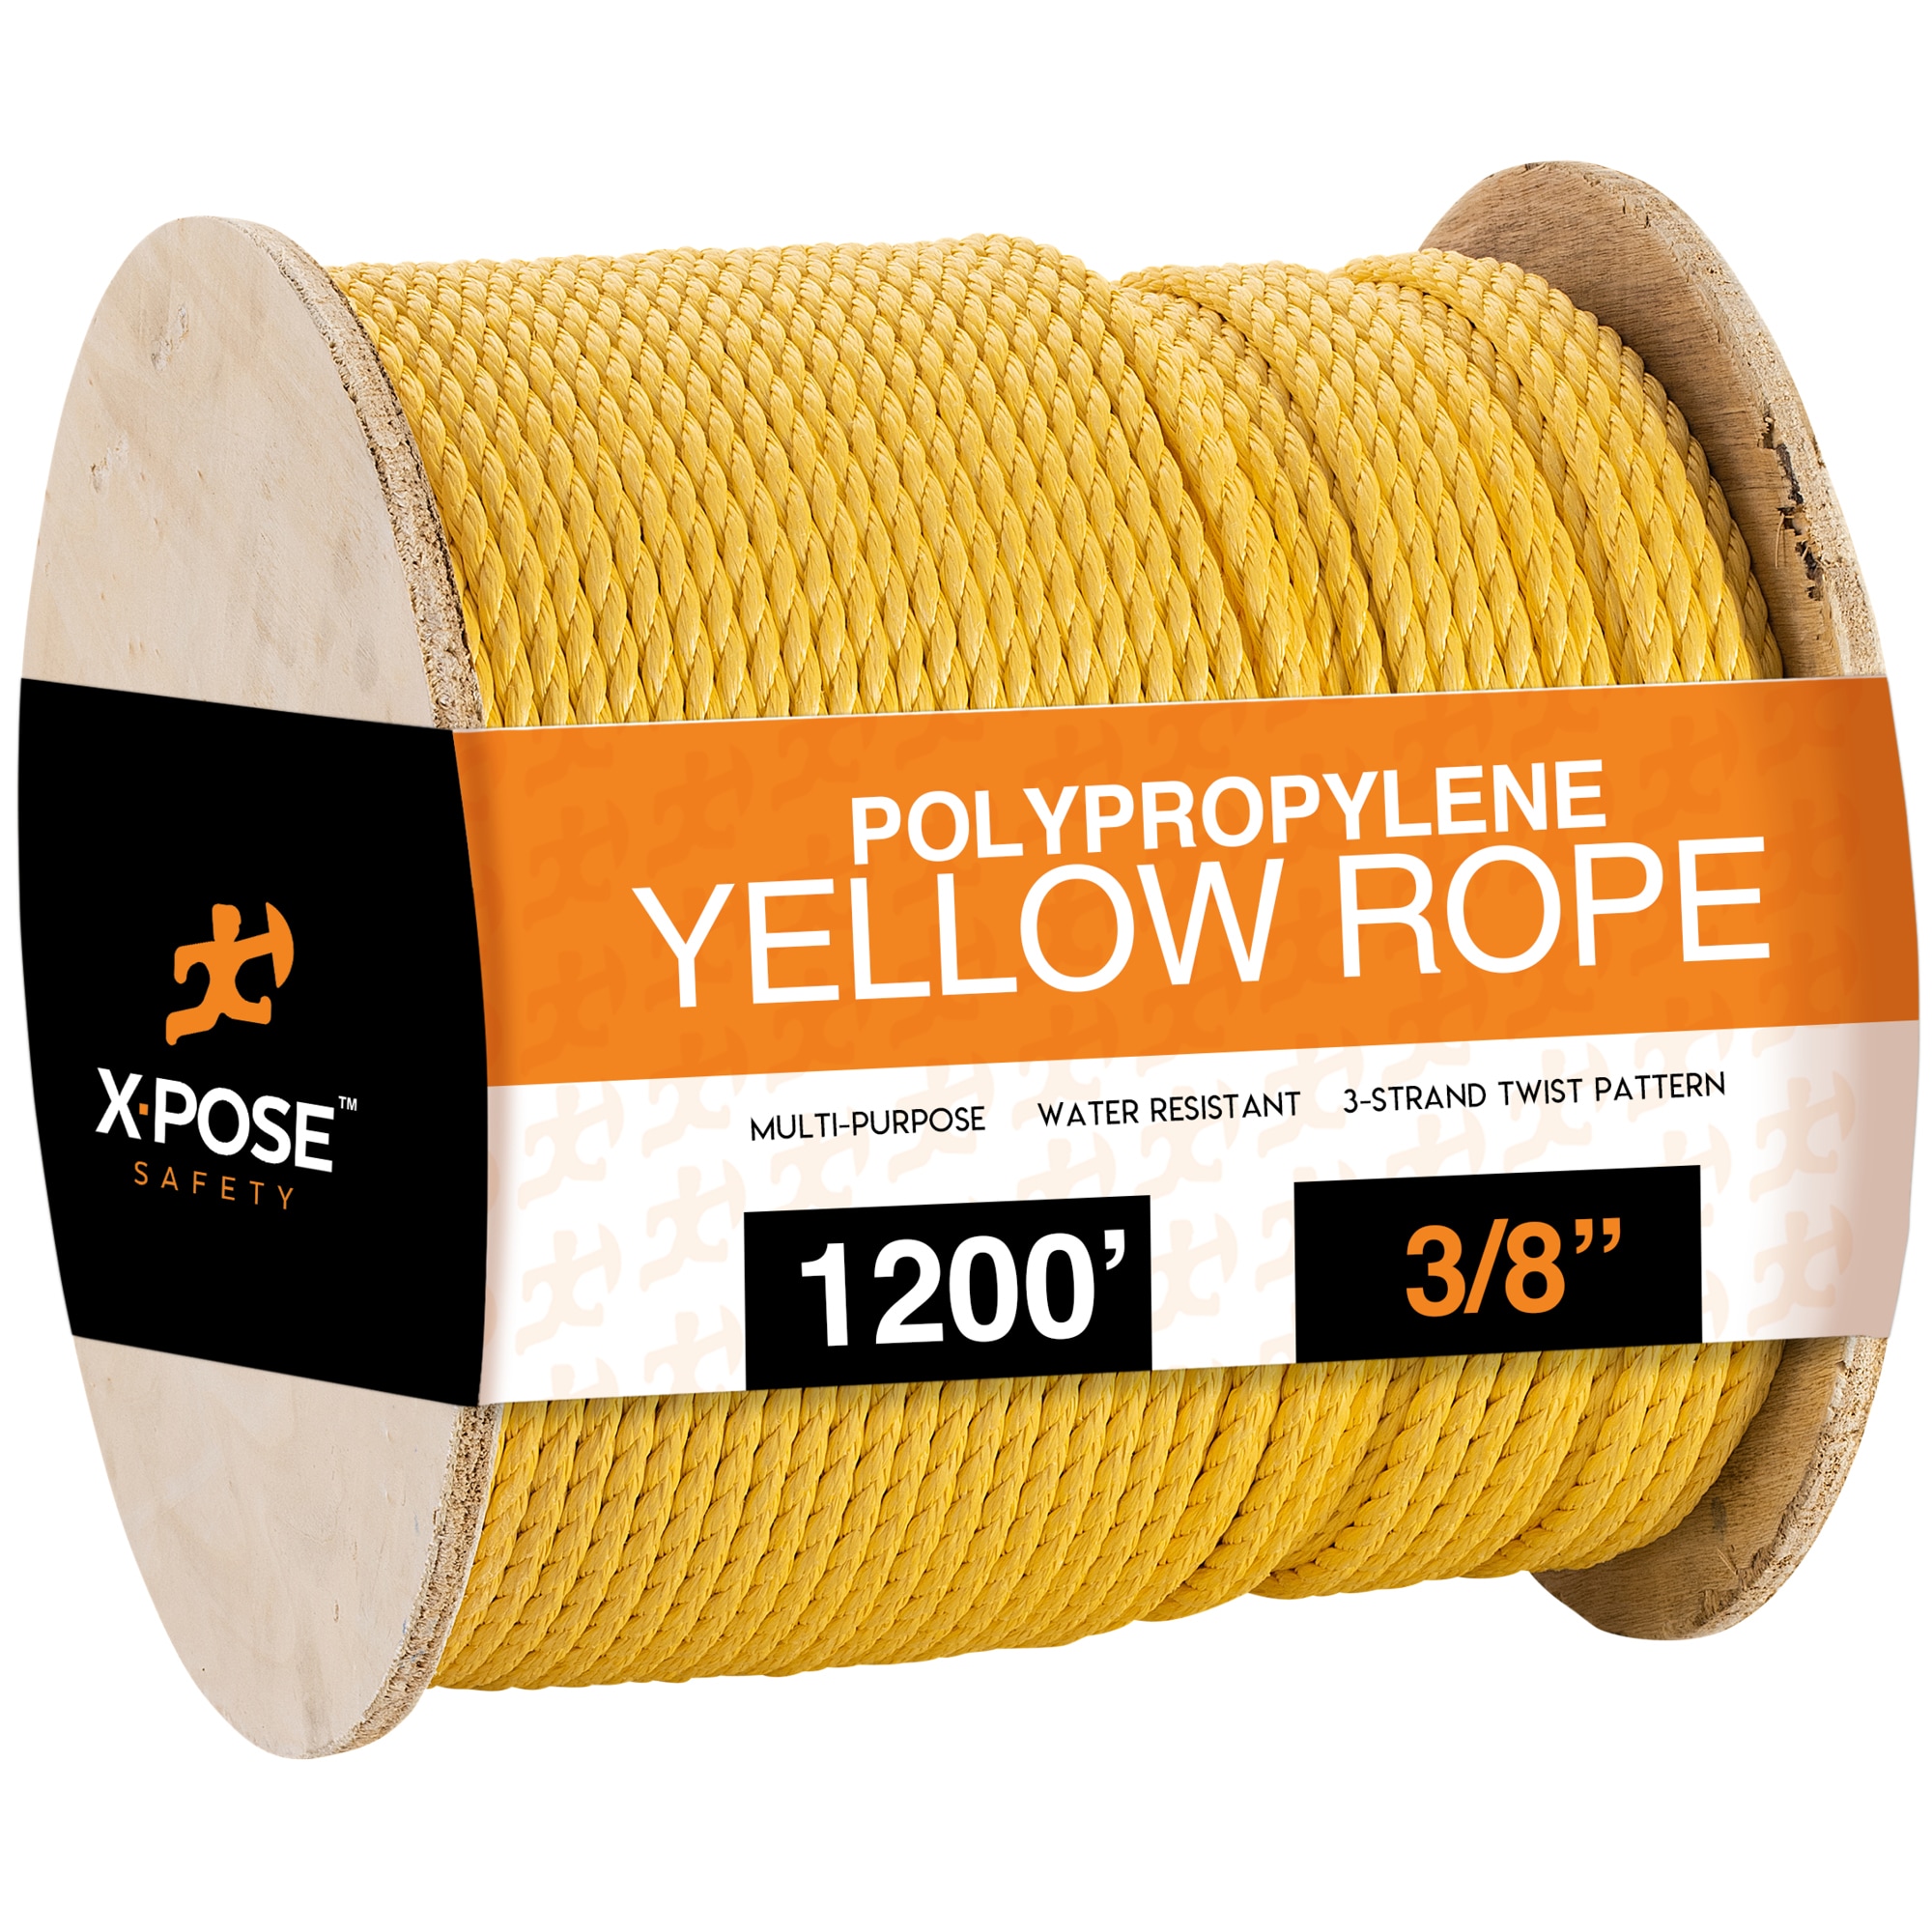 XPOSE SAFETY Yellow Twisted Polypropylene Rope - 3/8 Inch Floating Poly Pro  Cord 1200 Ft - Resistant to Oil, Moisture, Marine Growth and Chemicals -  Reduced Slip, Easy Knot, Flexible - by Xpose Safety at